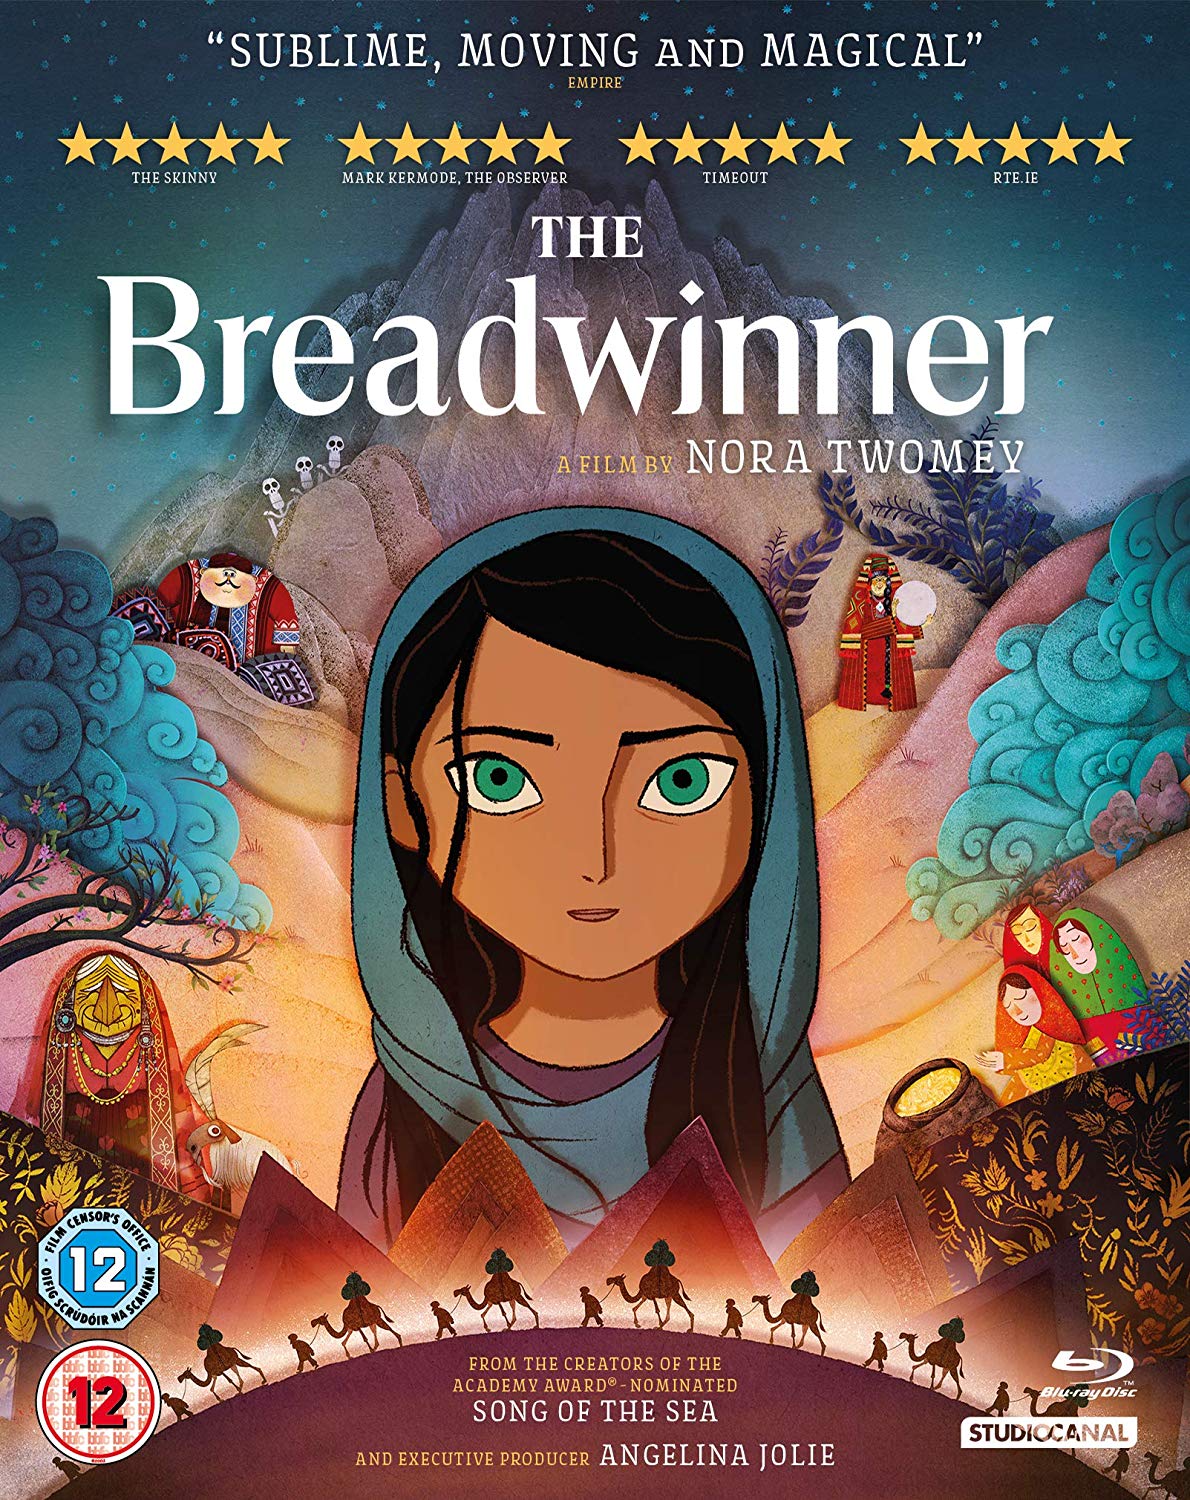 boom competitions - win The Breadwinner on Blu-ray